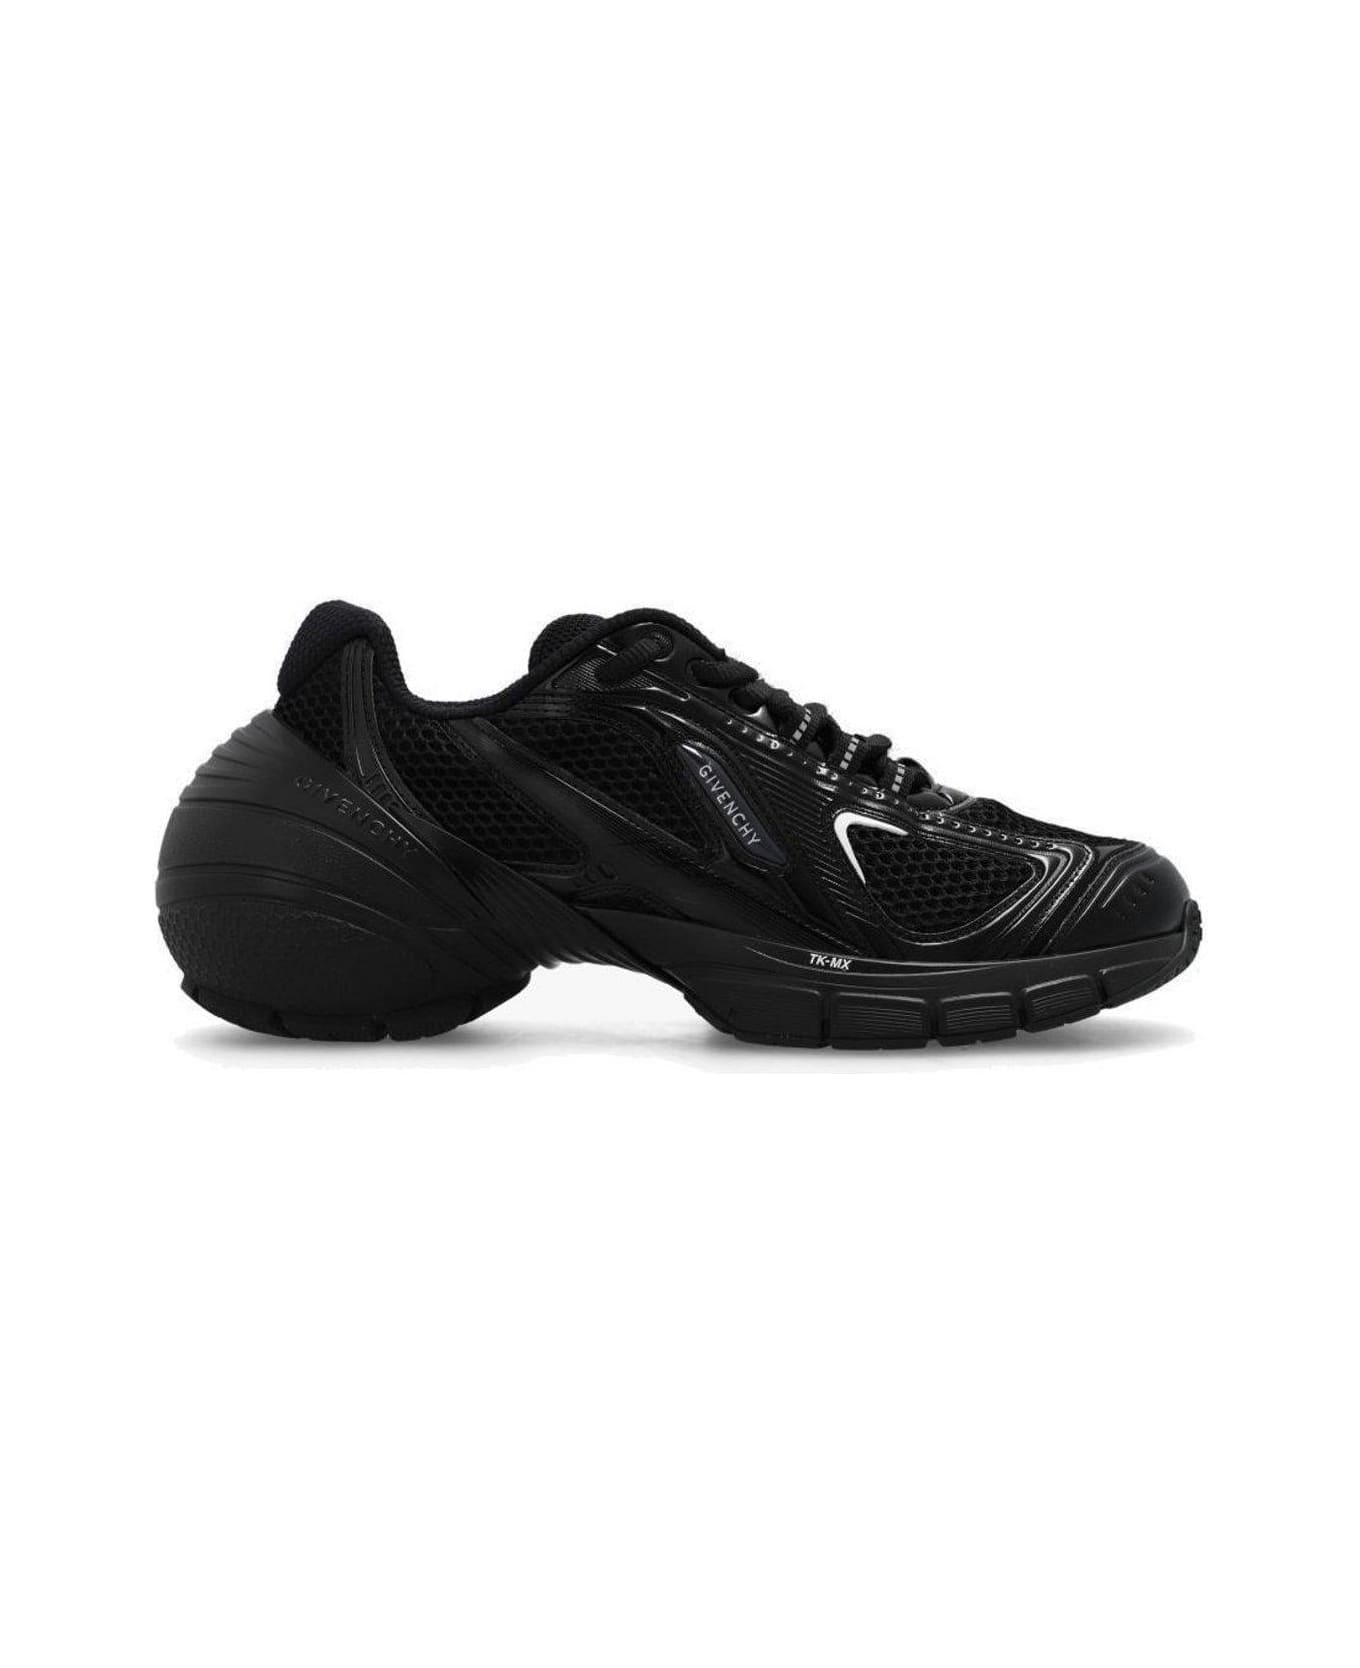 Givenchy Tk-mx Runner Lace-up Sneakers - Nero